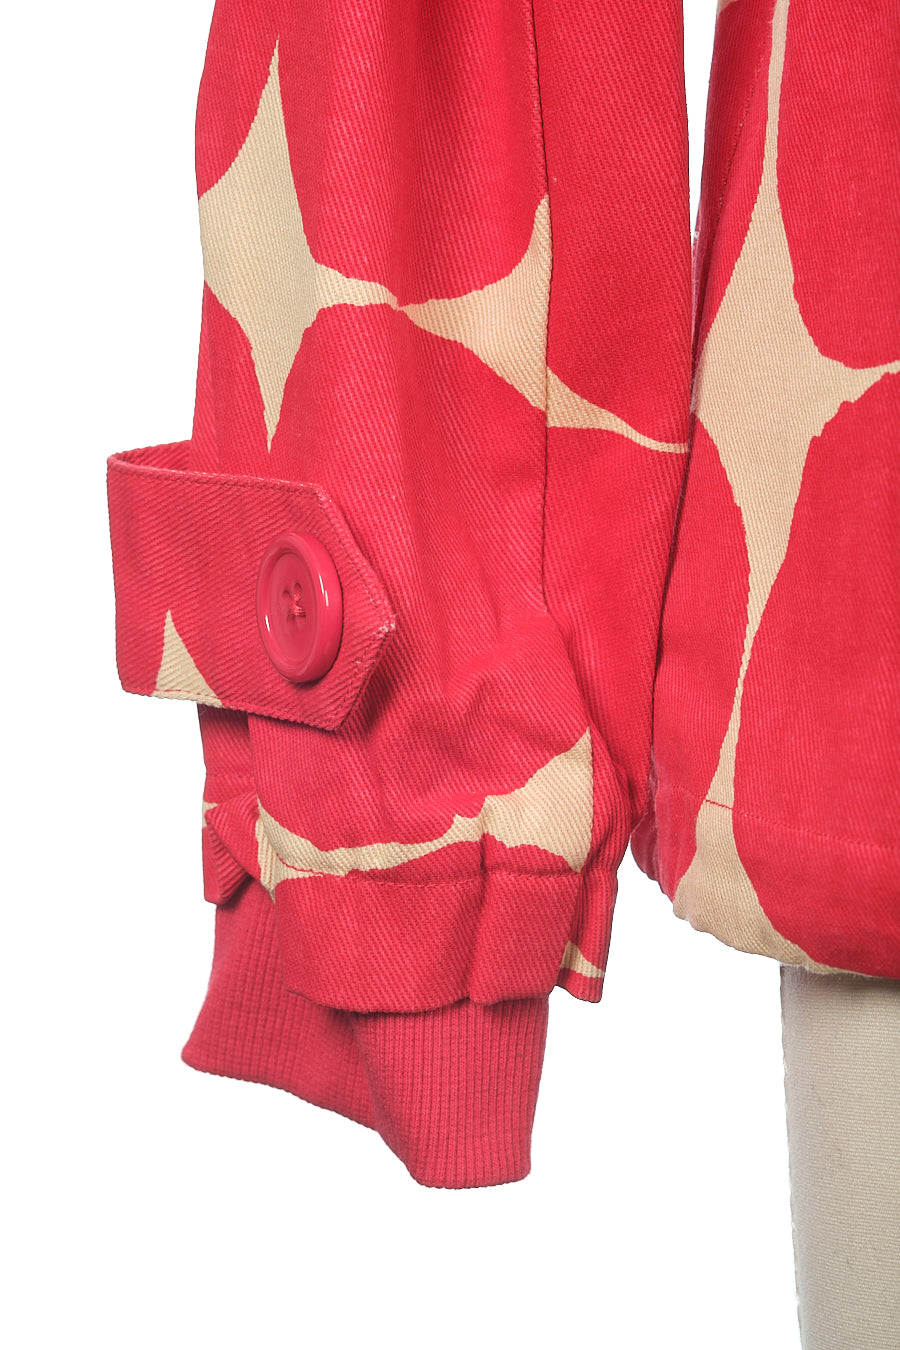 Join the Dots Jacket - Red